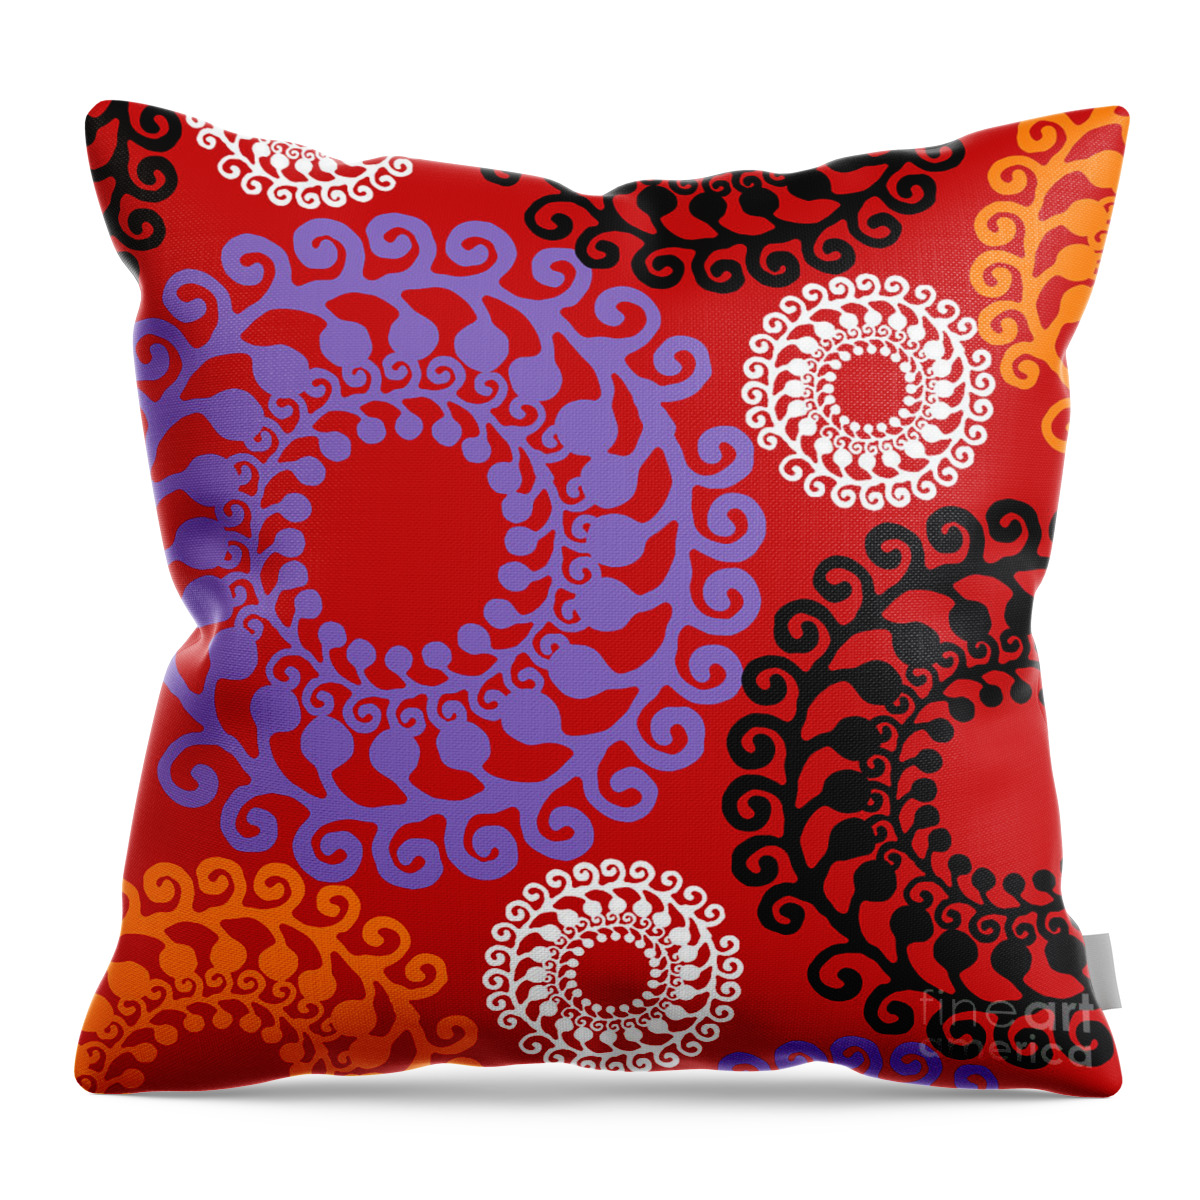 Mid Century Modern Throw Pillow featuring the painting Groovy Circles Red by Mindy Sommers